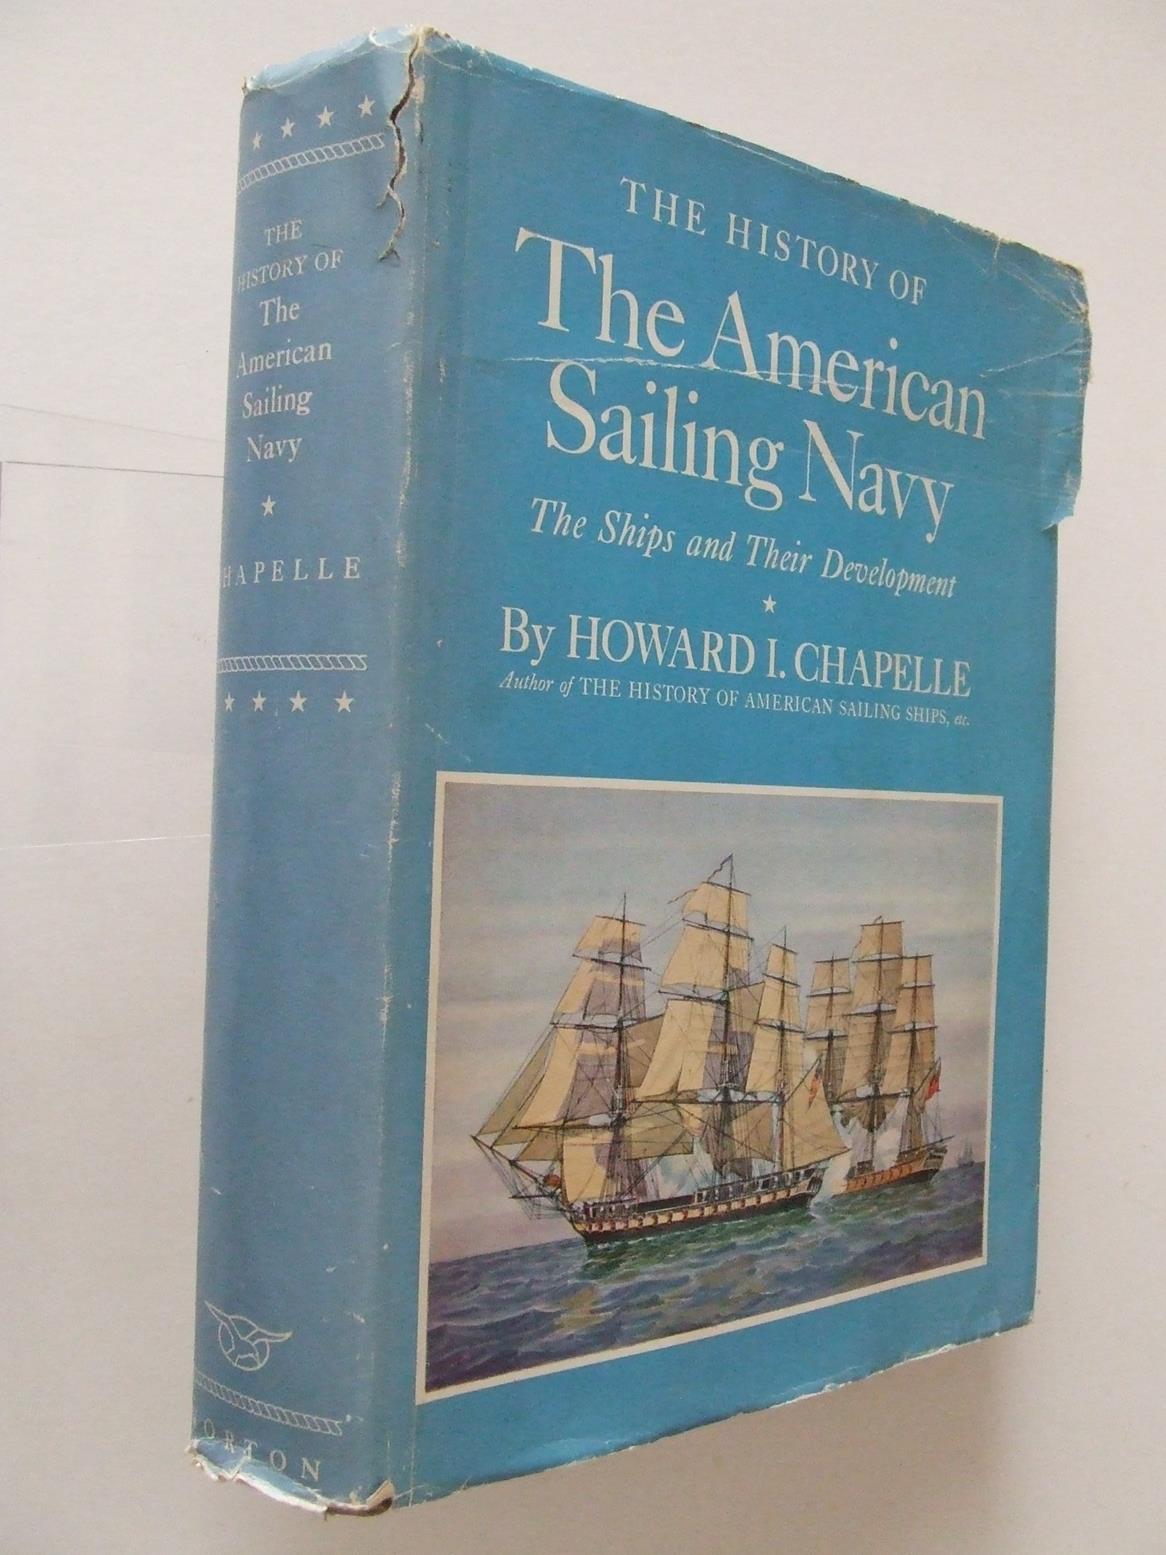 The History of the American Sailing Navy, the ships and their development